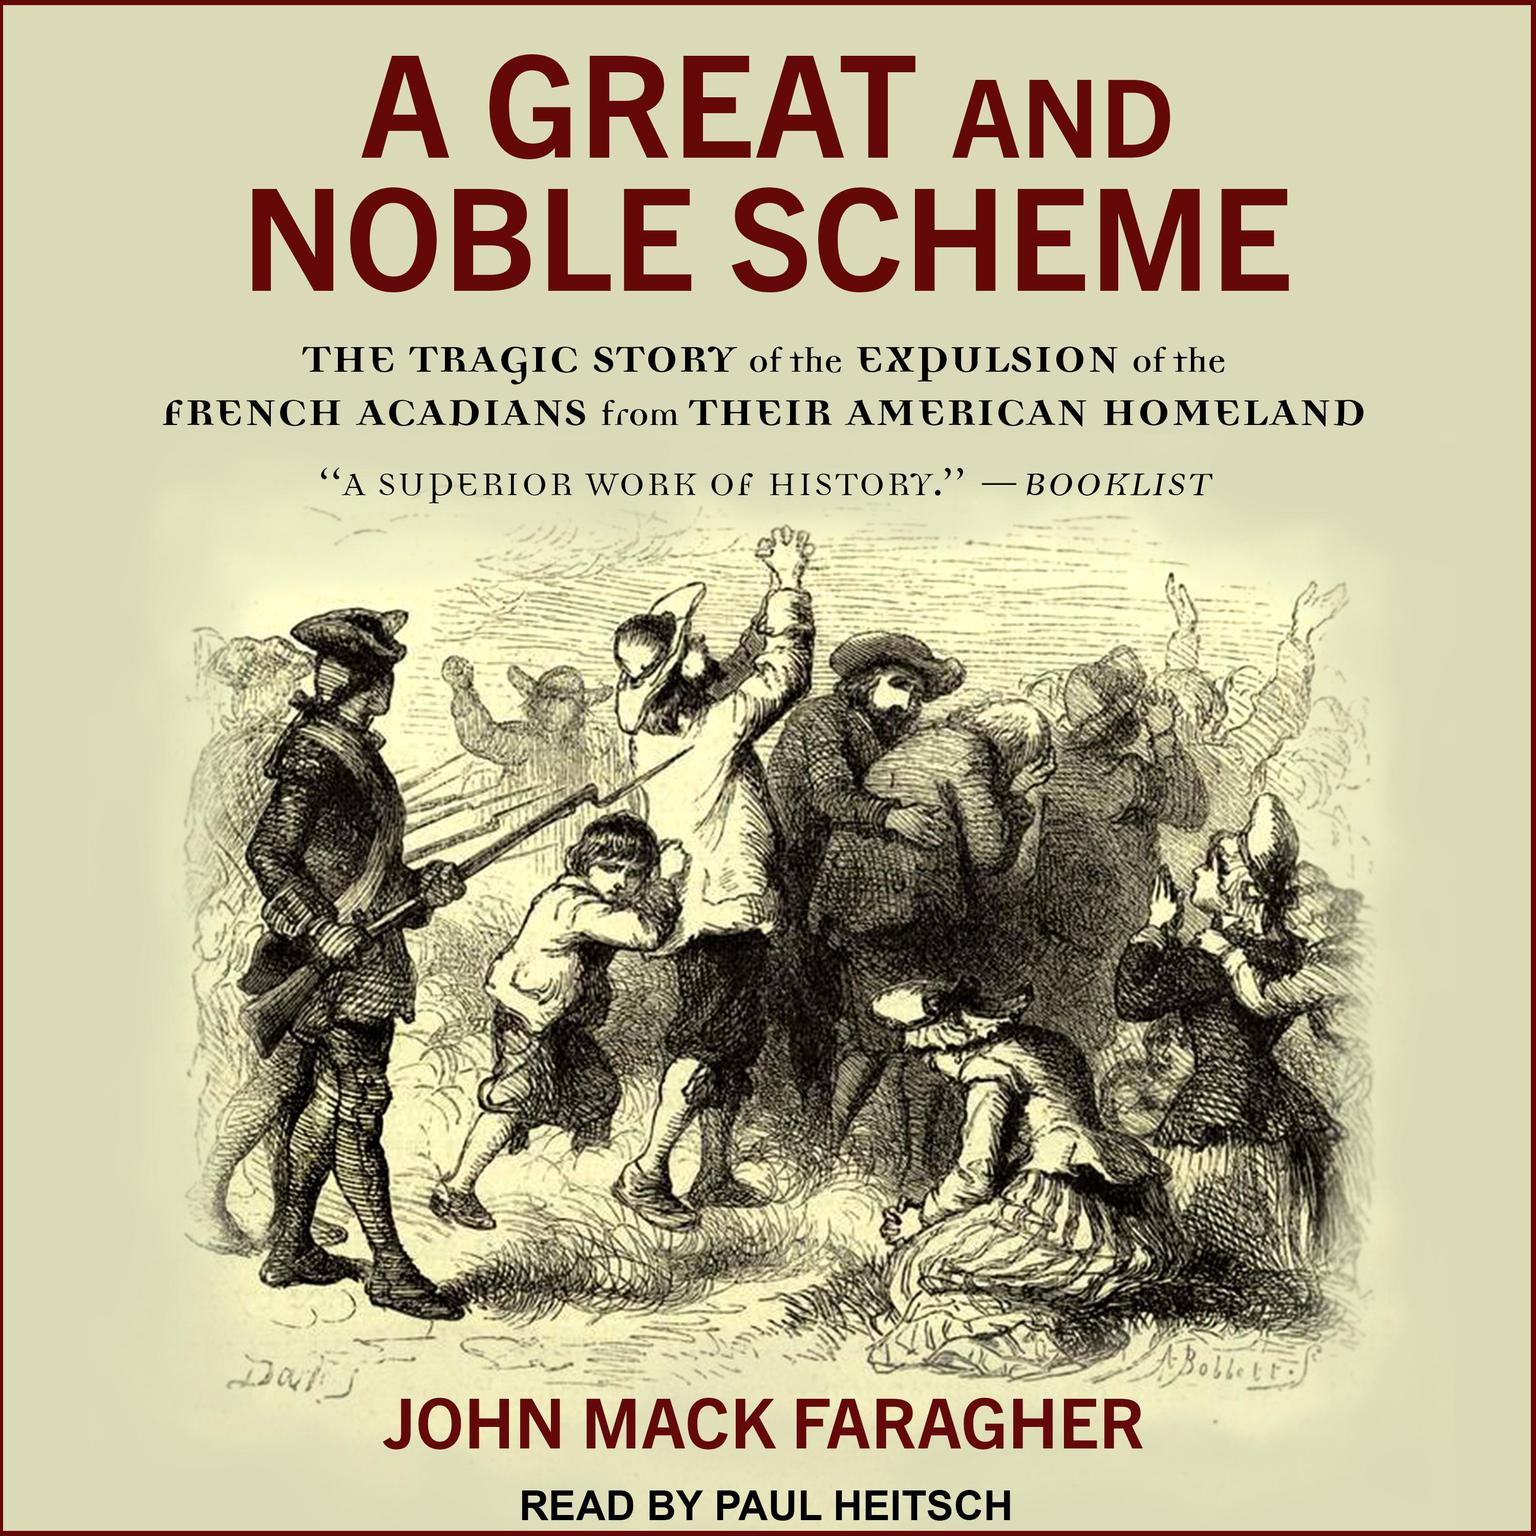 A Great and Noble Scheme: The Tragic Story of the Expulsion of the French Acadians from Their American Homeland Audiobook, by John Mack Faragher